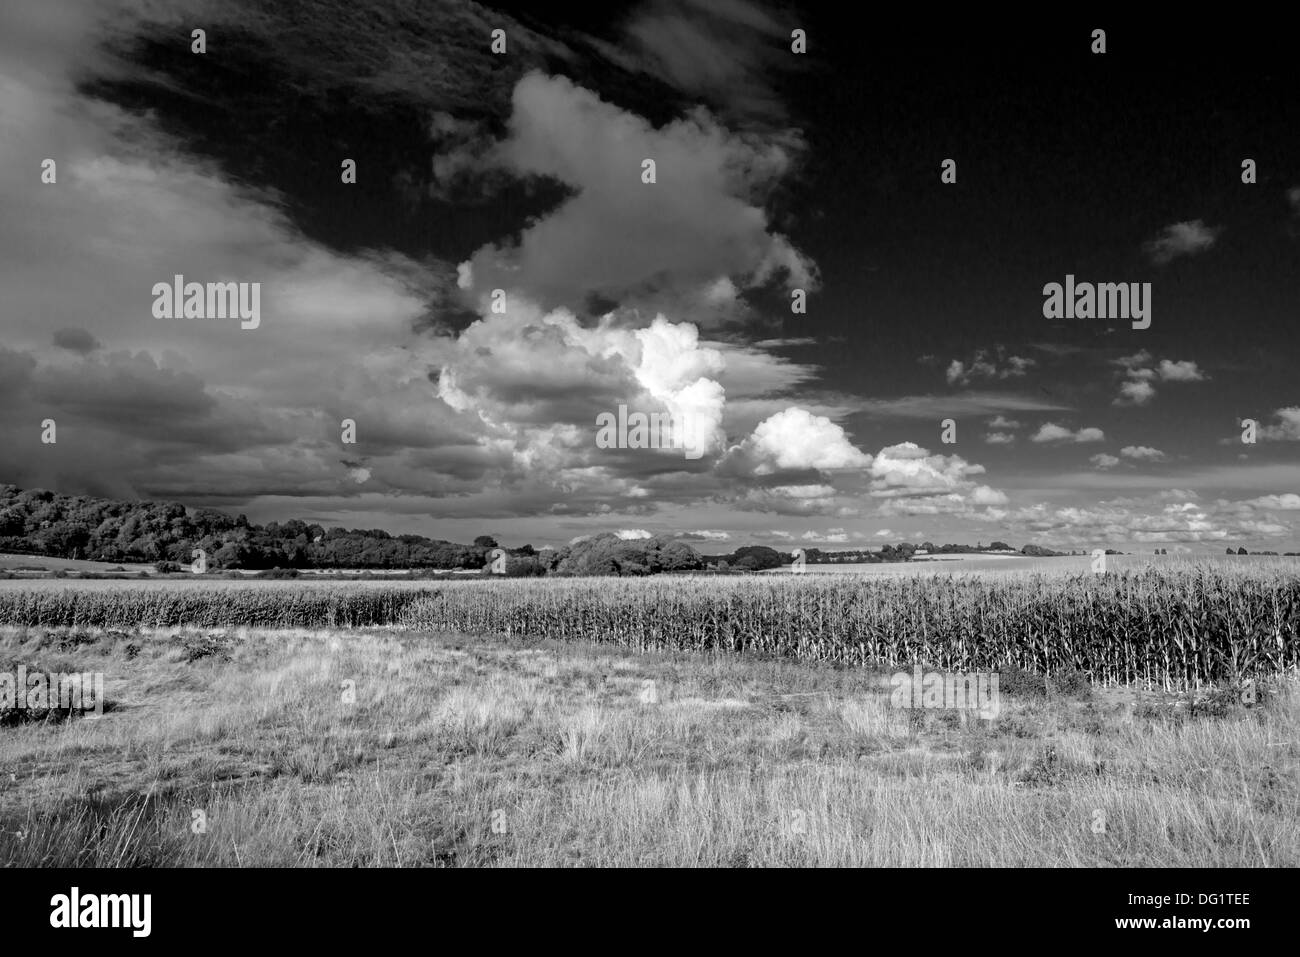 A Landscape View Of A Field Of Sweetcorn, East Sussex, England, Uk (Black and white) Stock Photo